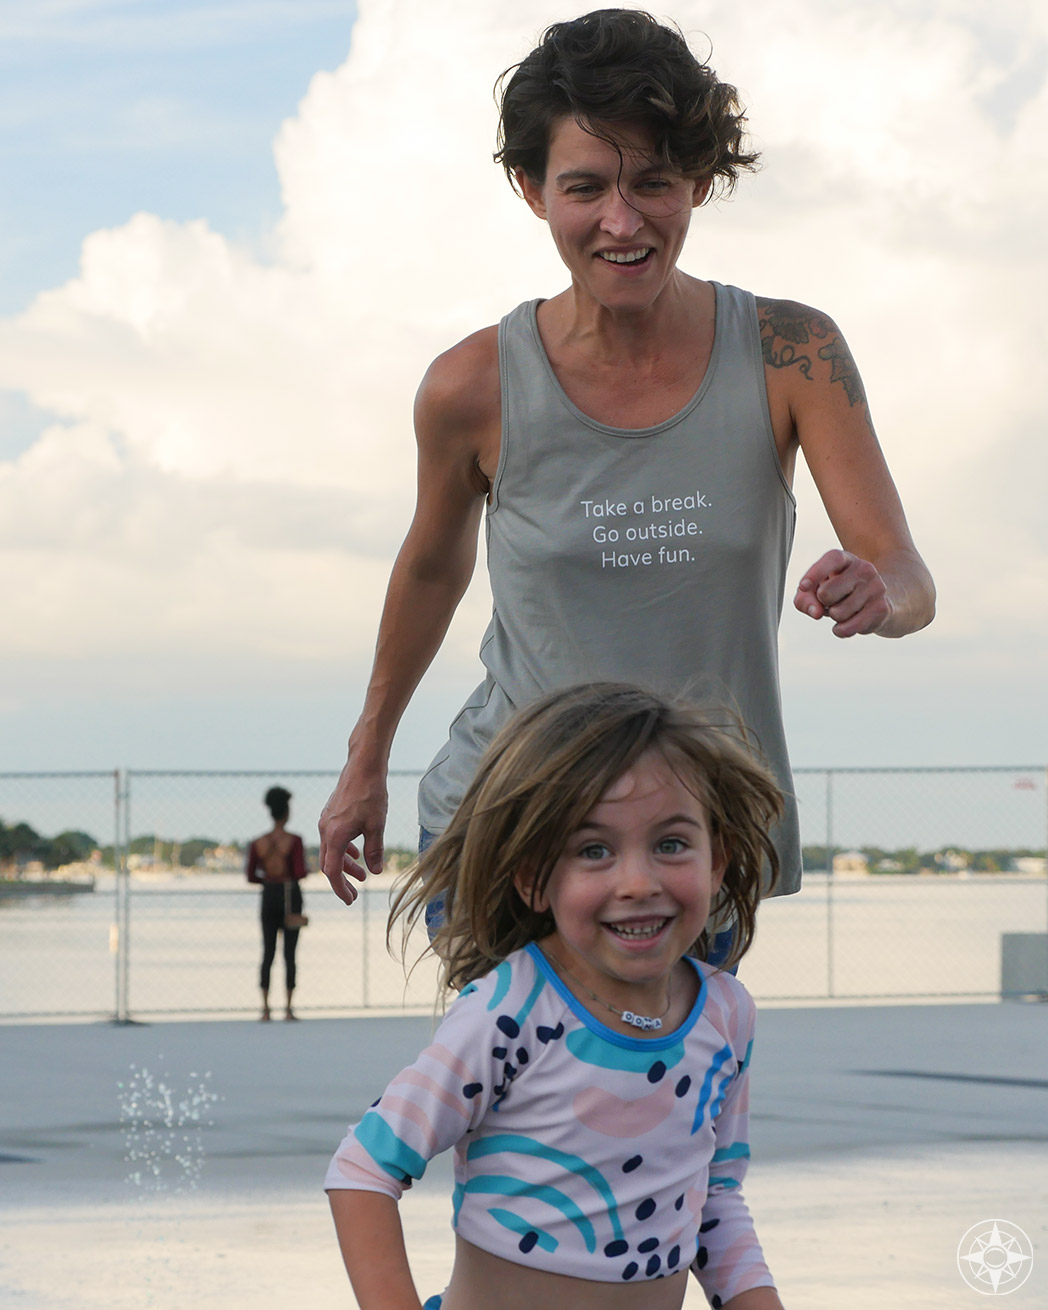 Woman running with daughter having fun, St Pete Pier, Florida, Take a Break. Go outside. Have fun. first Happier Place Tank Top